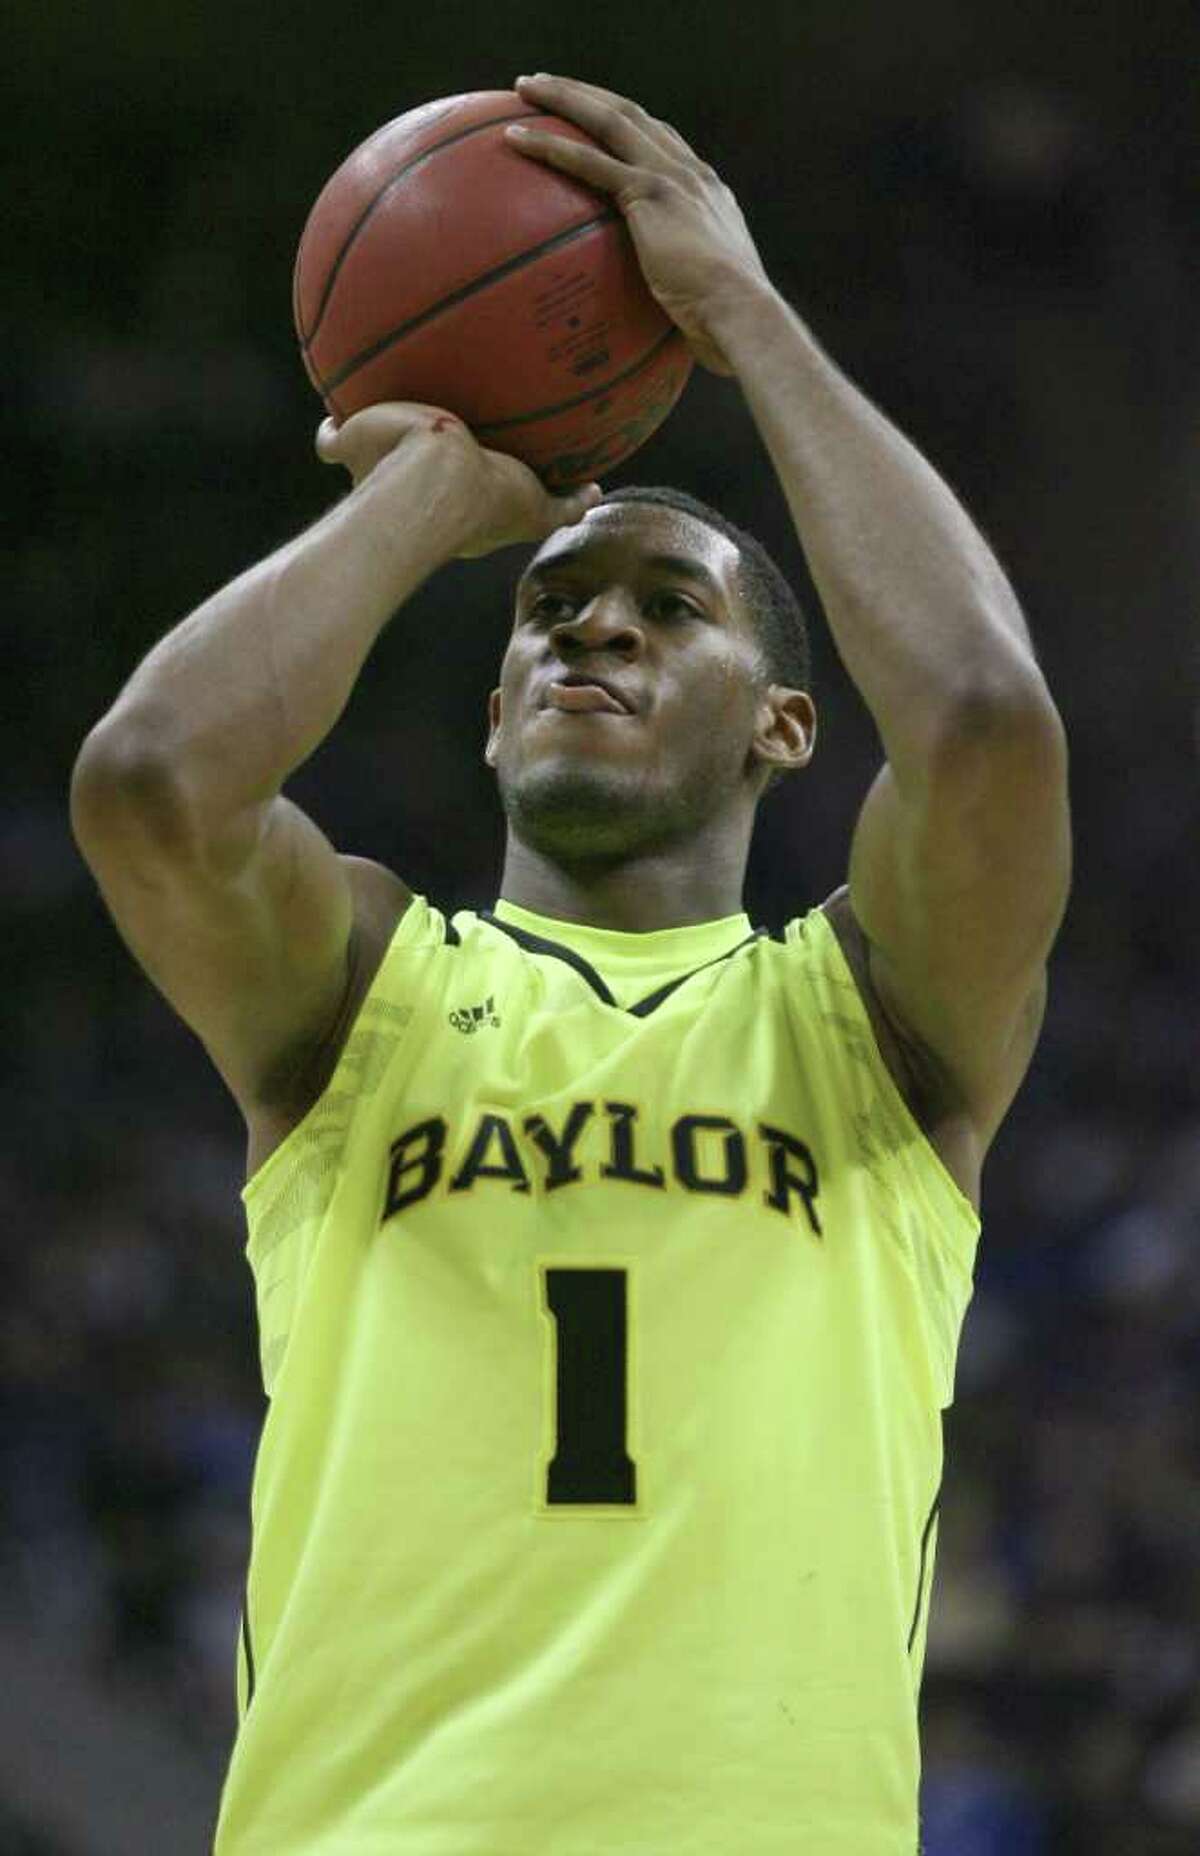 KANSAS CITY, MO - MARCH 08: Perry Jones III #1 of the Baylor Bears shoots a free throw during a game against the Kansas State Wildcats in the quarterfinals of the Big 12 Basketball Tournament March 8, 2012 at Sprint Center in Kansas City, Missouri.